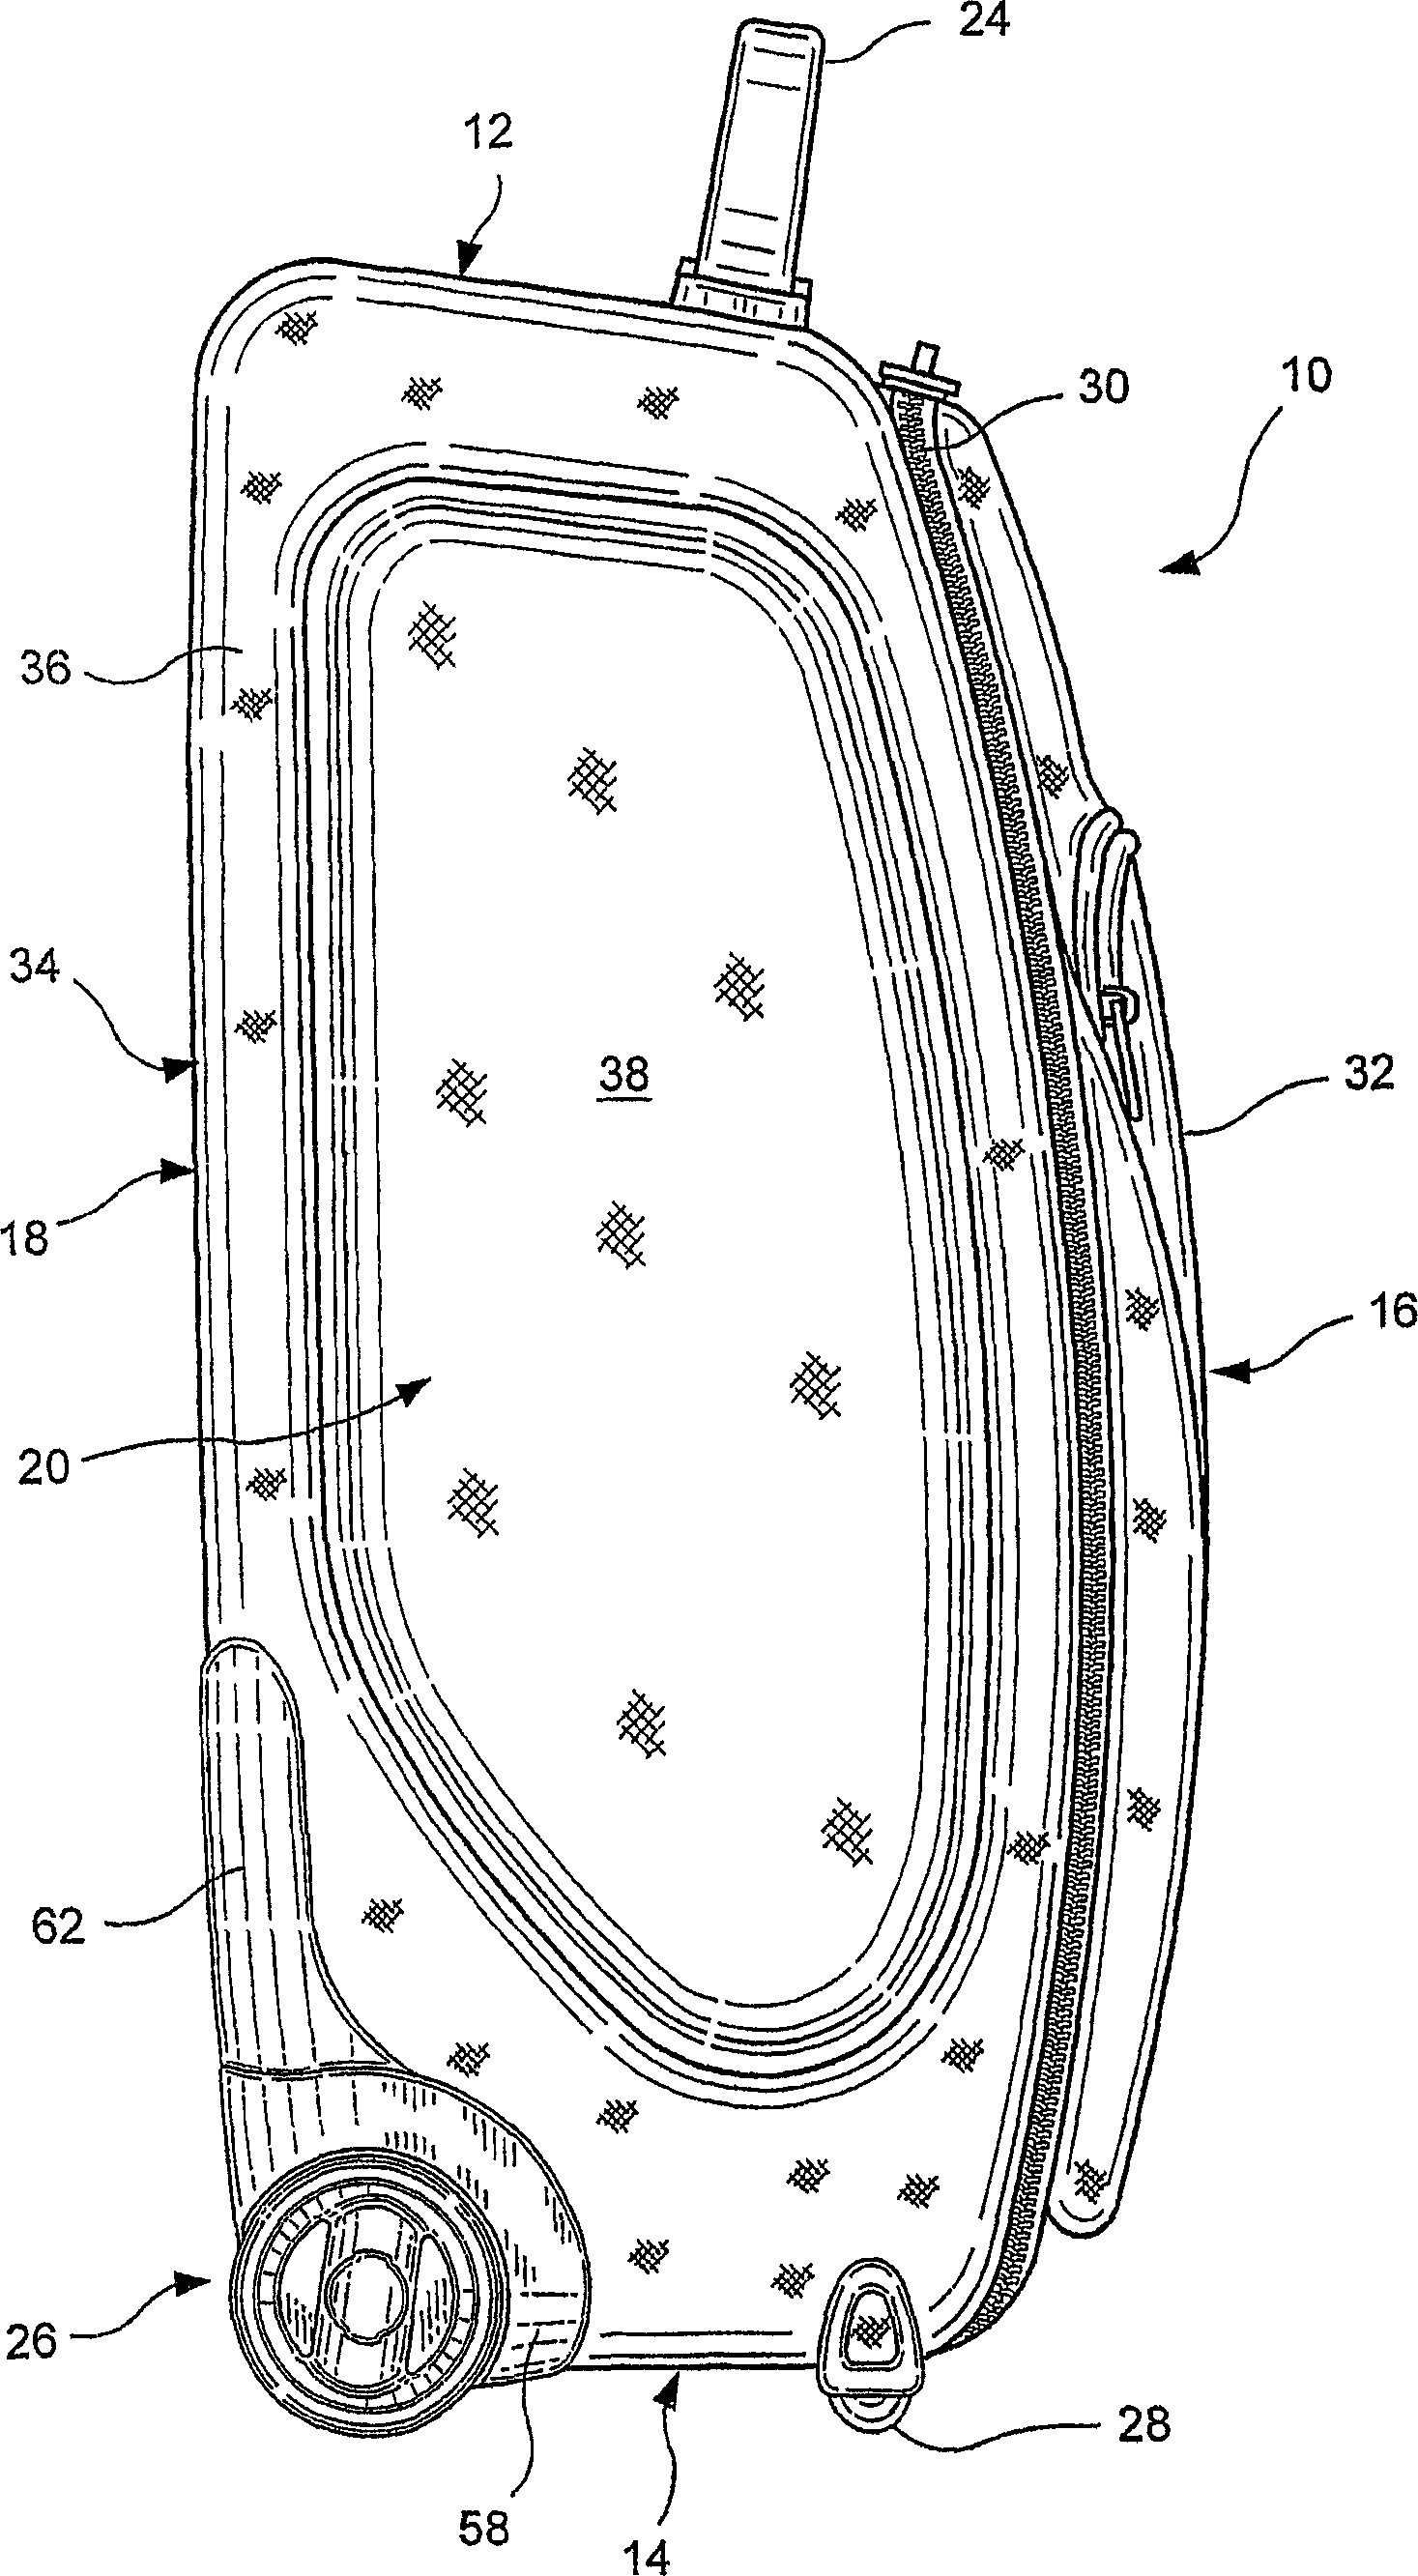 Gusset for a light-weight bag, a bag assembled therefrom, and methods for the manufacture and assembly thereof